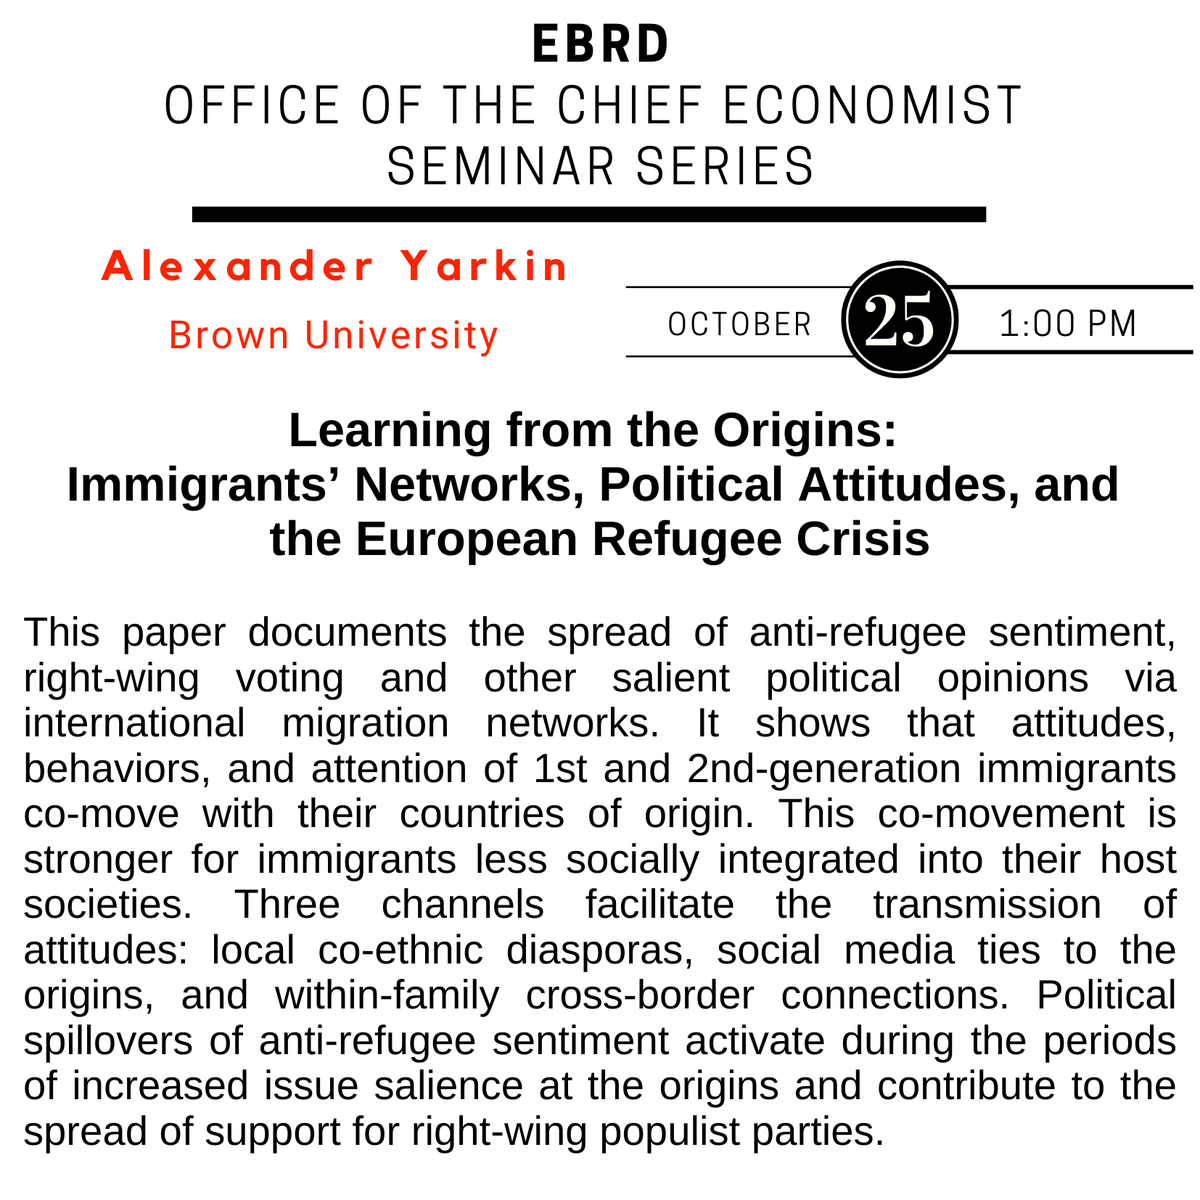 We are excited to host Alex Yarkin from Brown for our @EBRD research seminar tomorrow at 1 PM (London time)